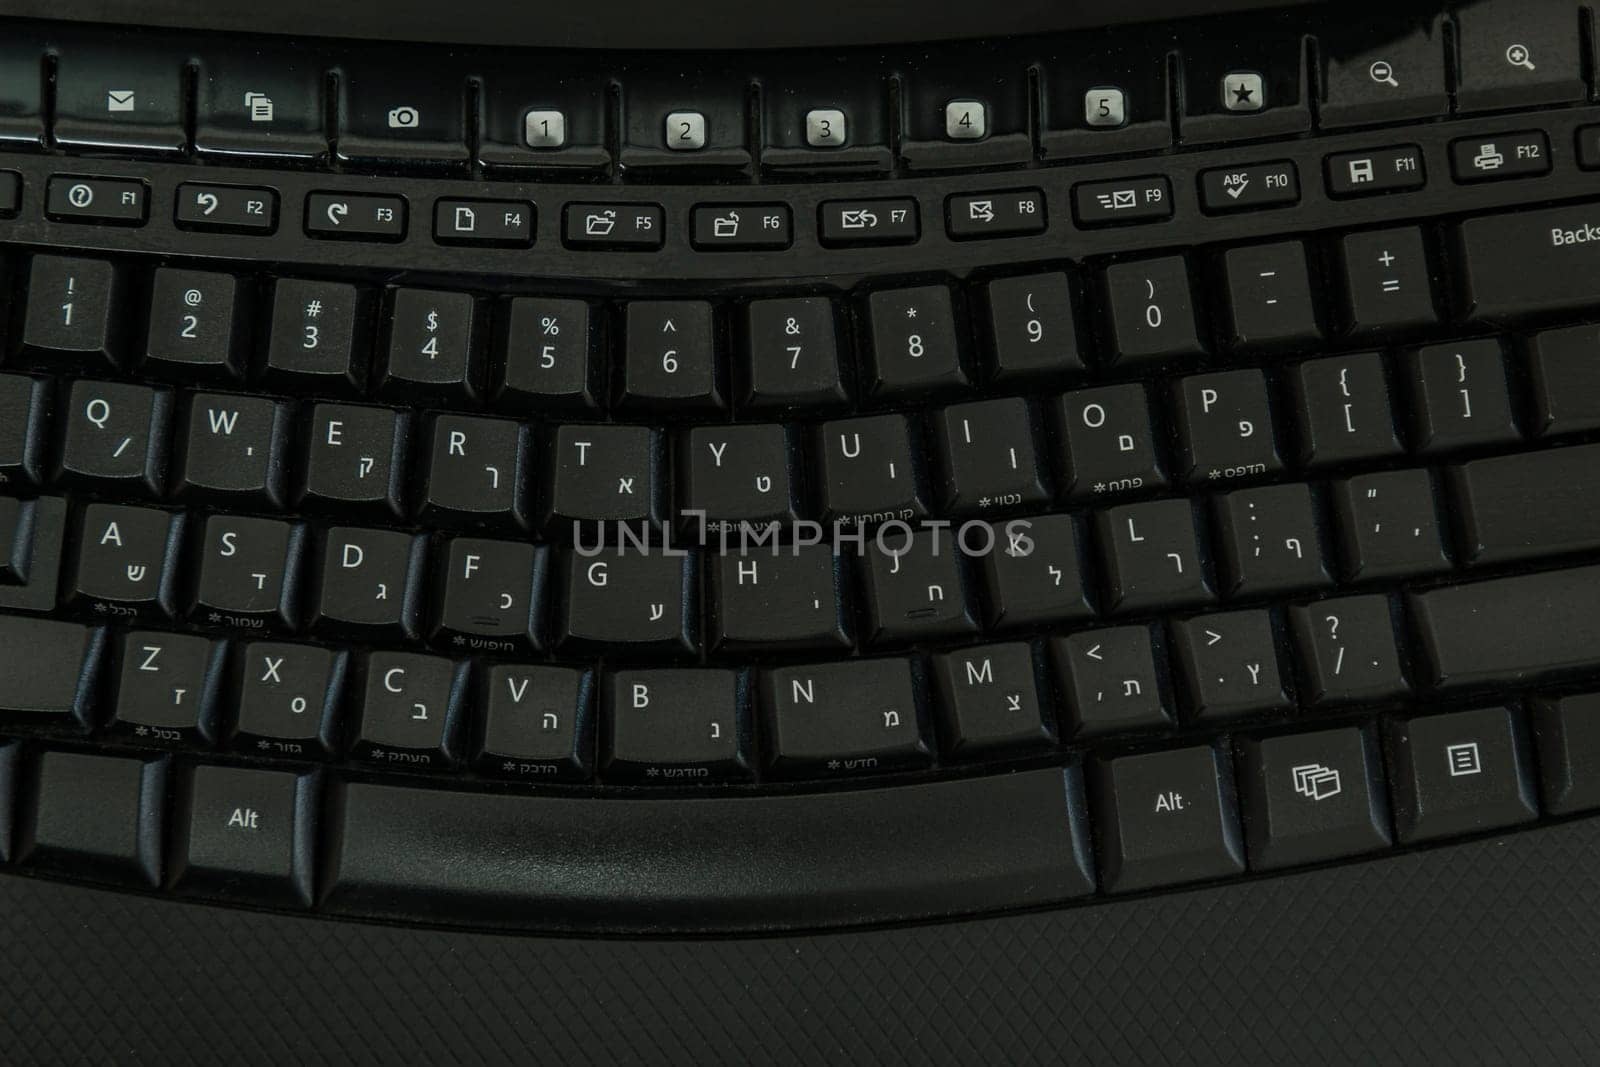 Keyboard with letters in Hebrew and English - Wireless keyboard - Top View